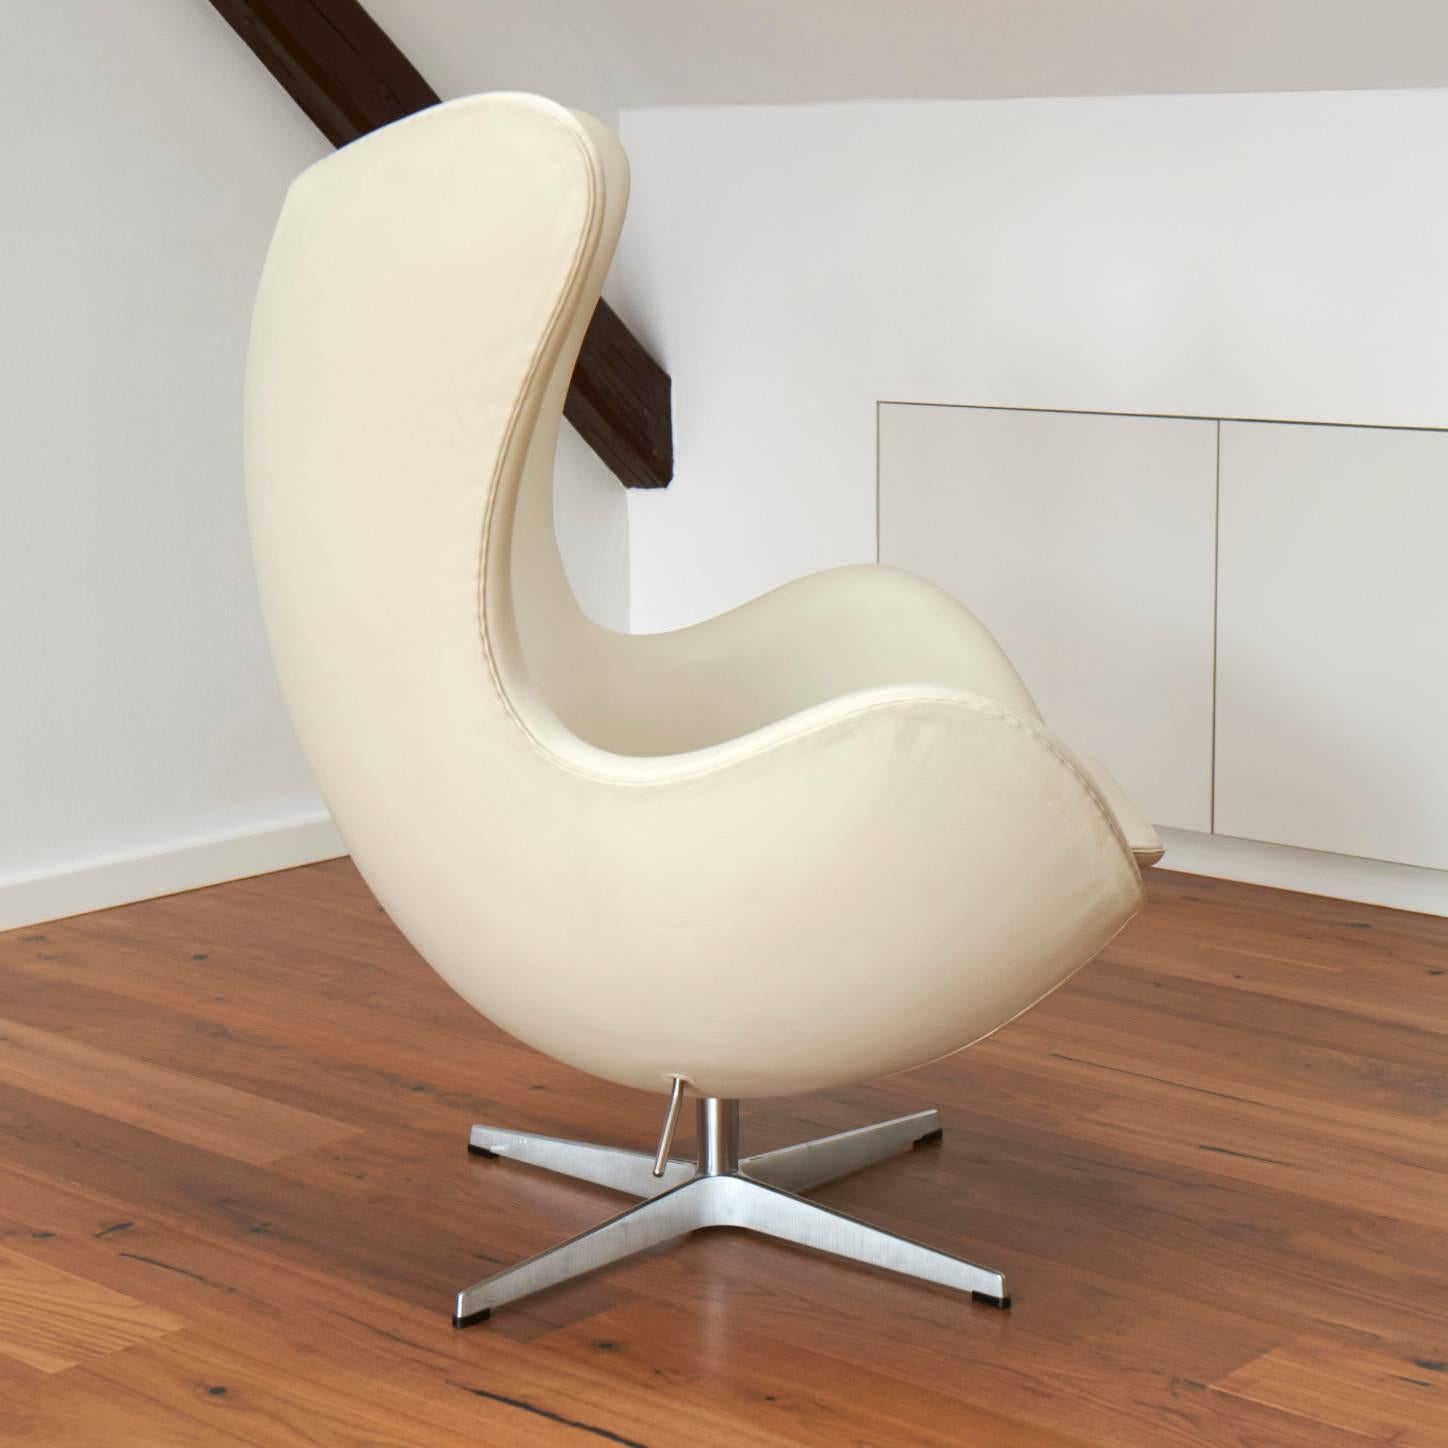 The egg chair by Arne Jacobsen in a creme white leather. 
The chair is in a very good condition.